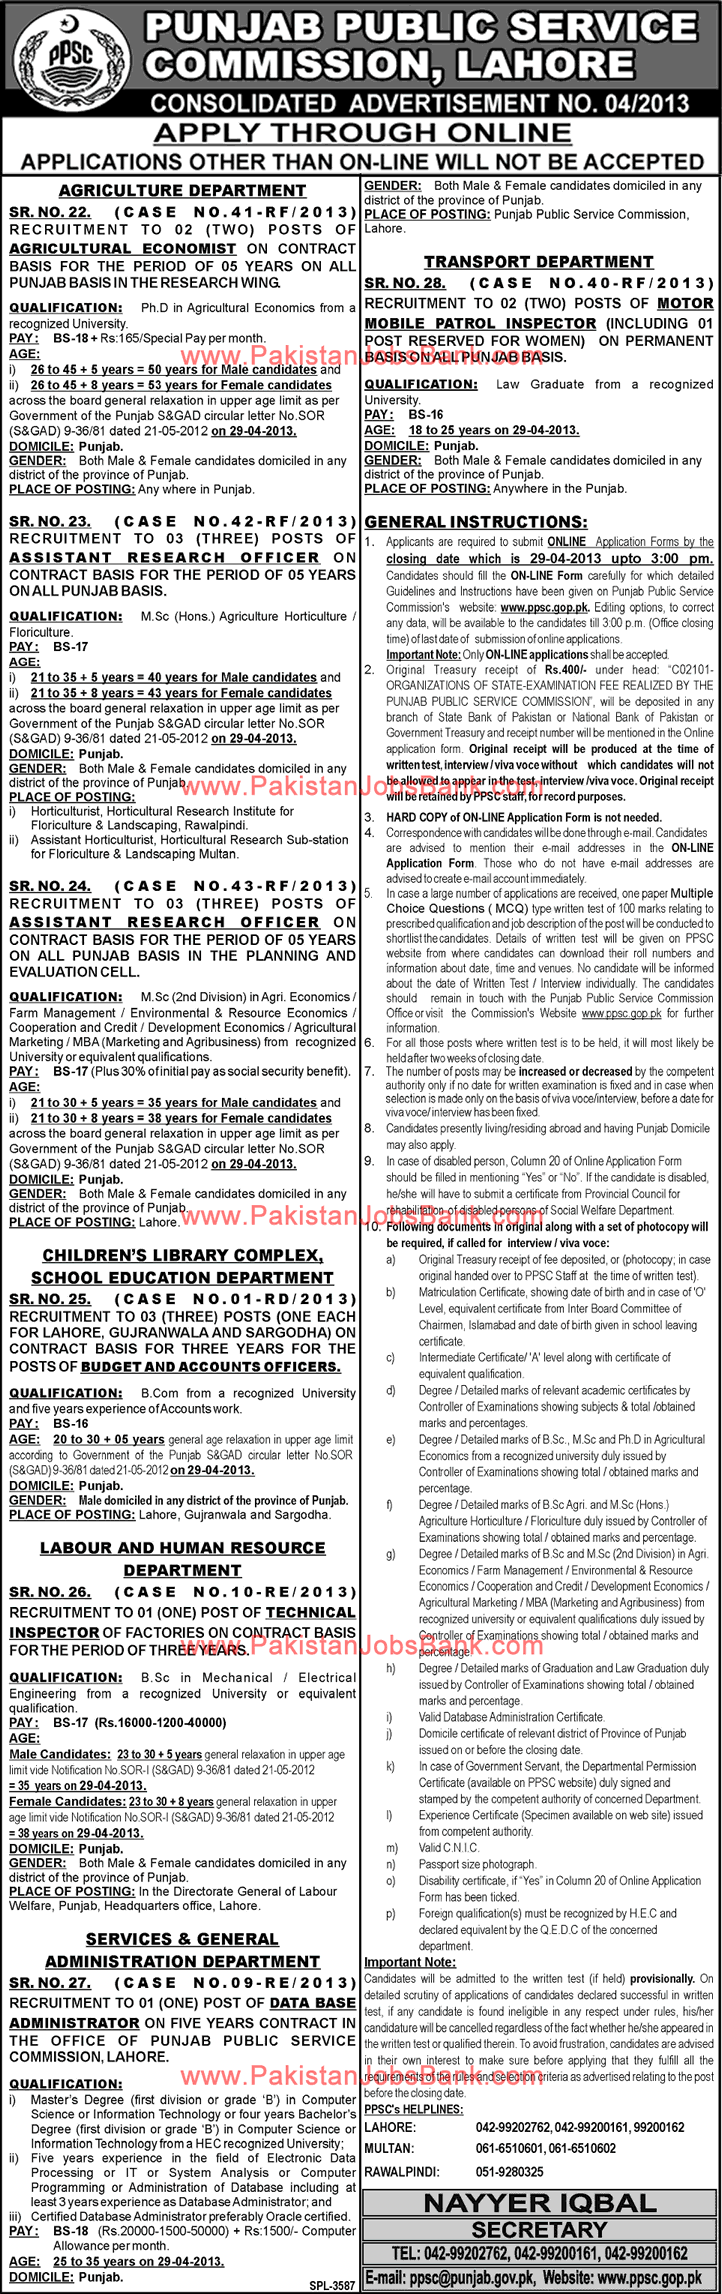 PPSC Jobs April 2013 Latest Consolidated Advertisement No. 04/2013